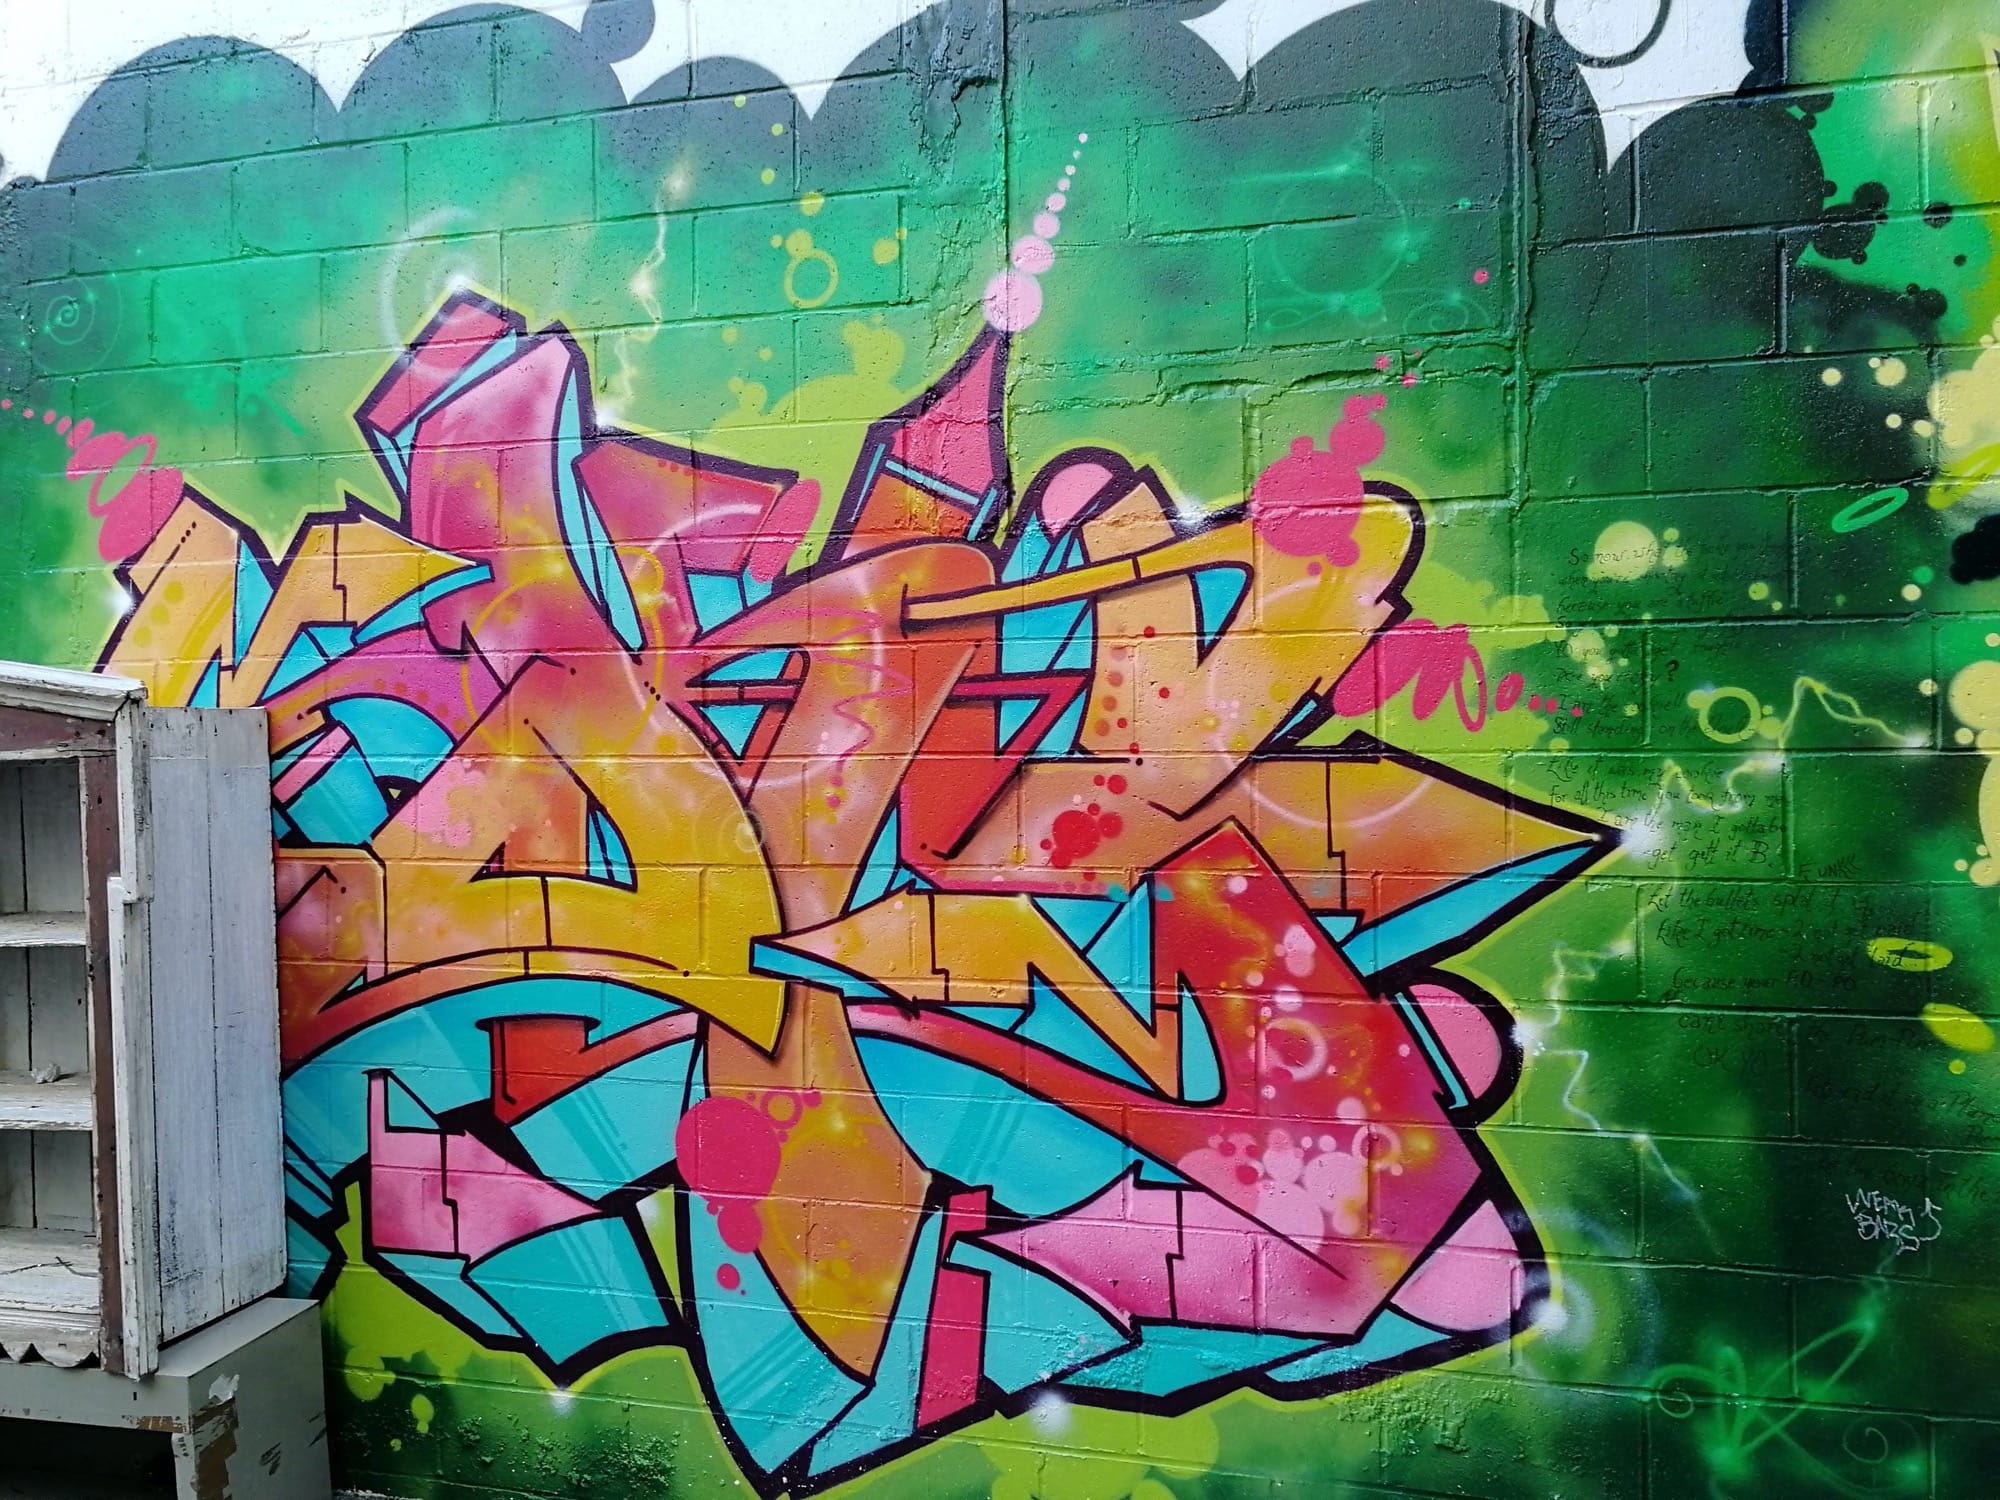 Graffiti 2397  captured by Rabot in Toronto Canada